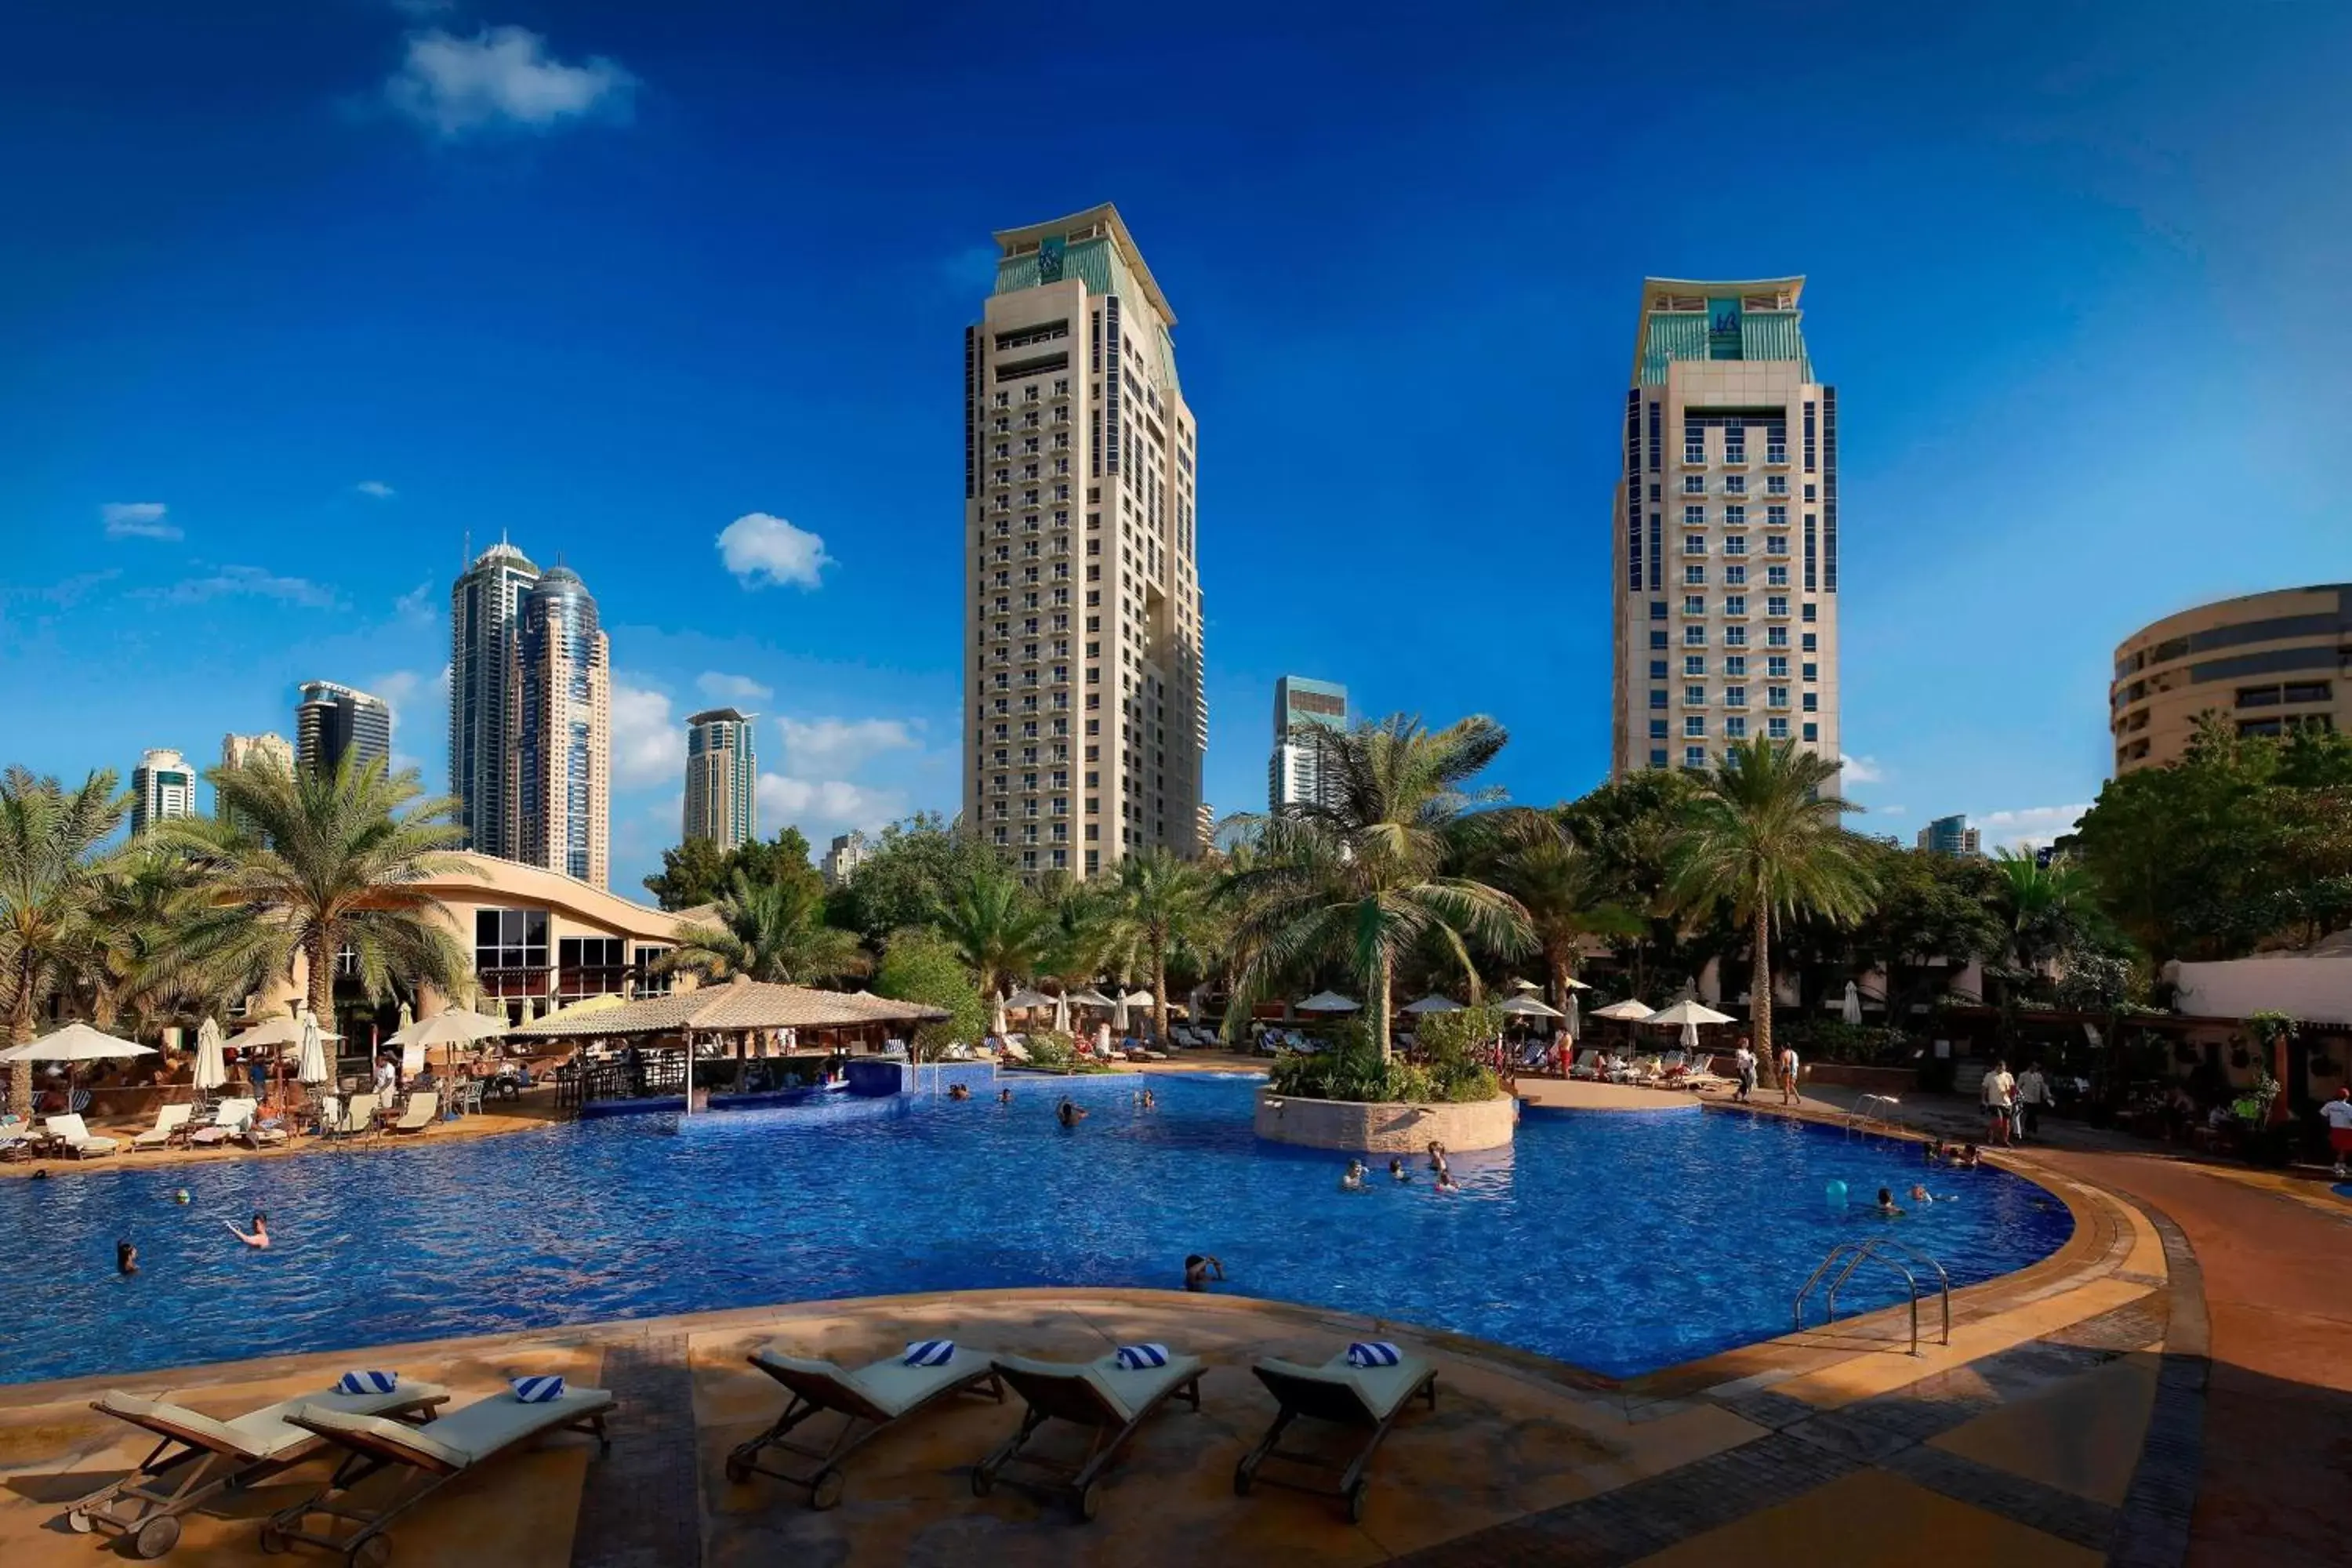 Swimming Pool in Habtoor Grand Resort, Autograph Collection